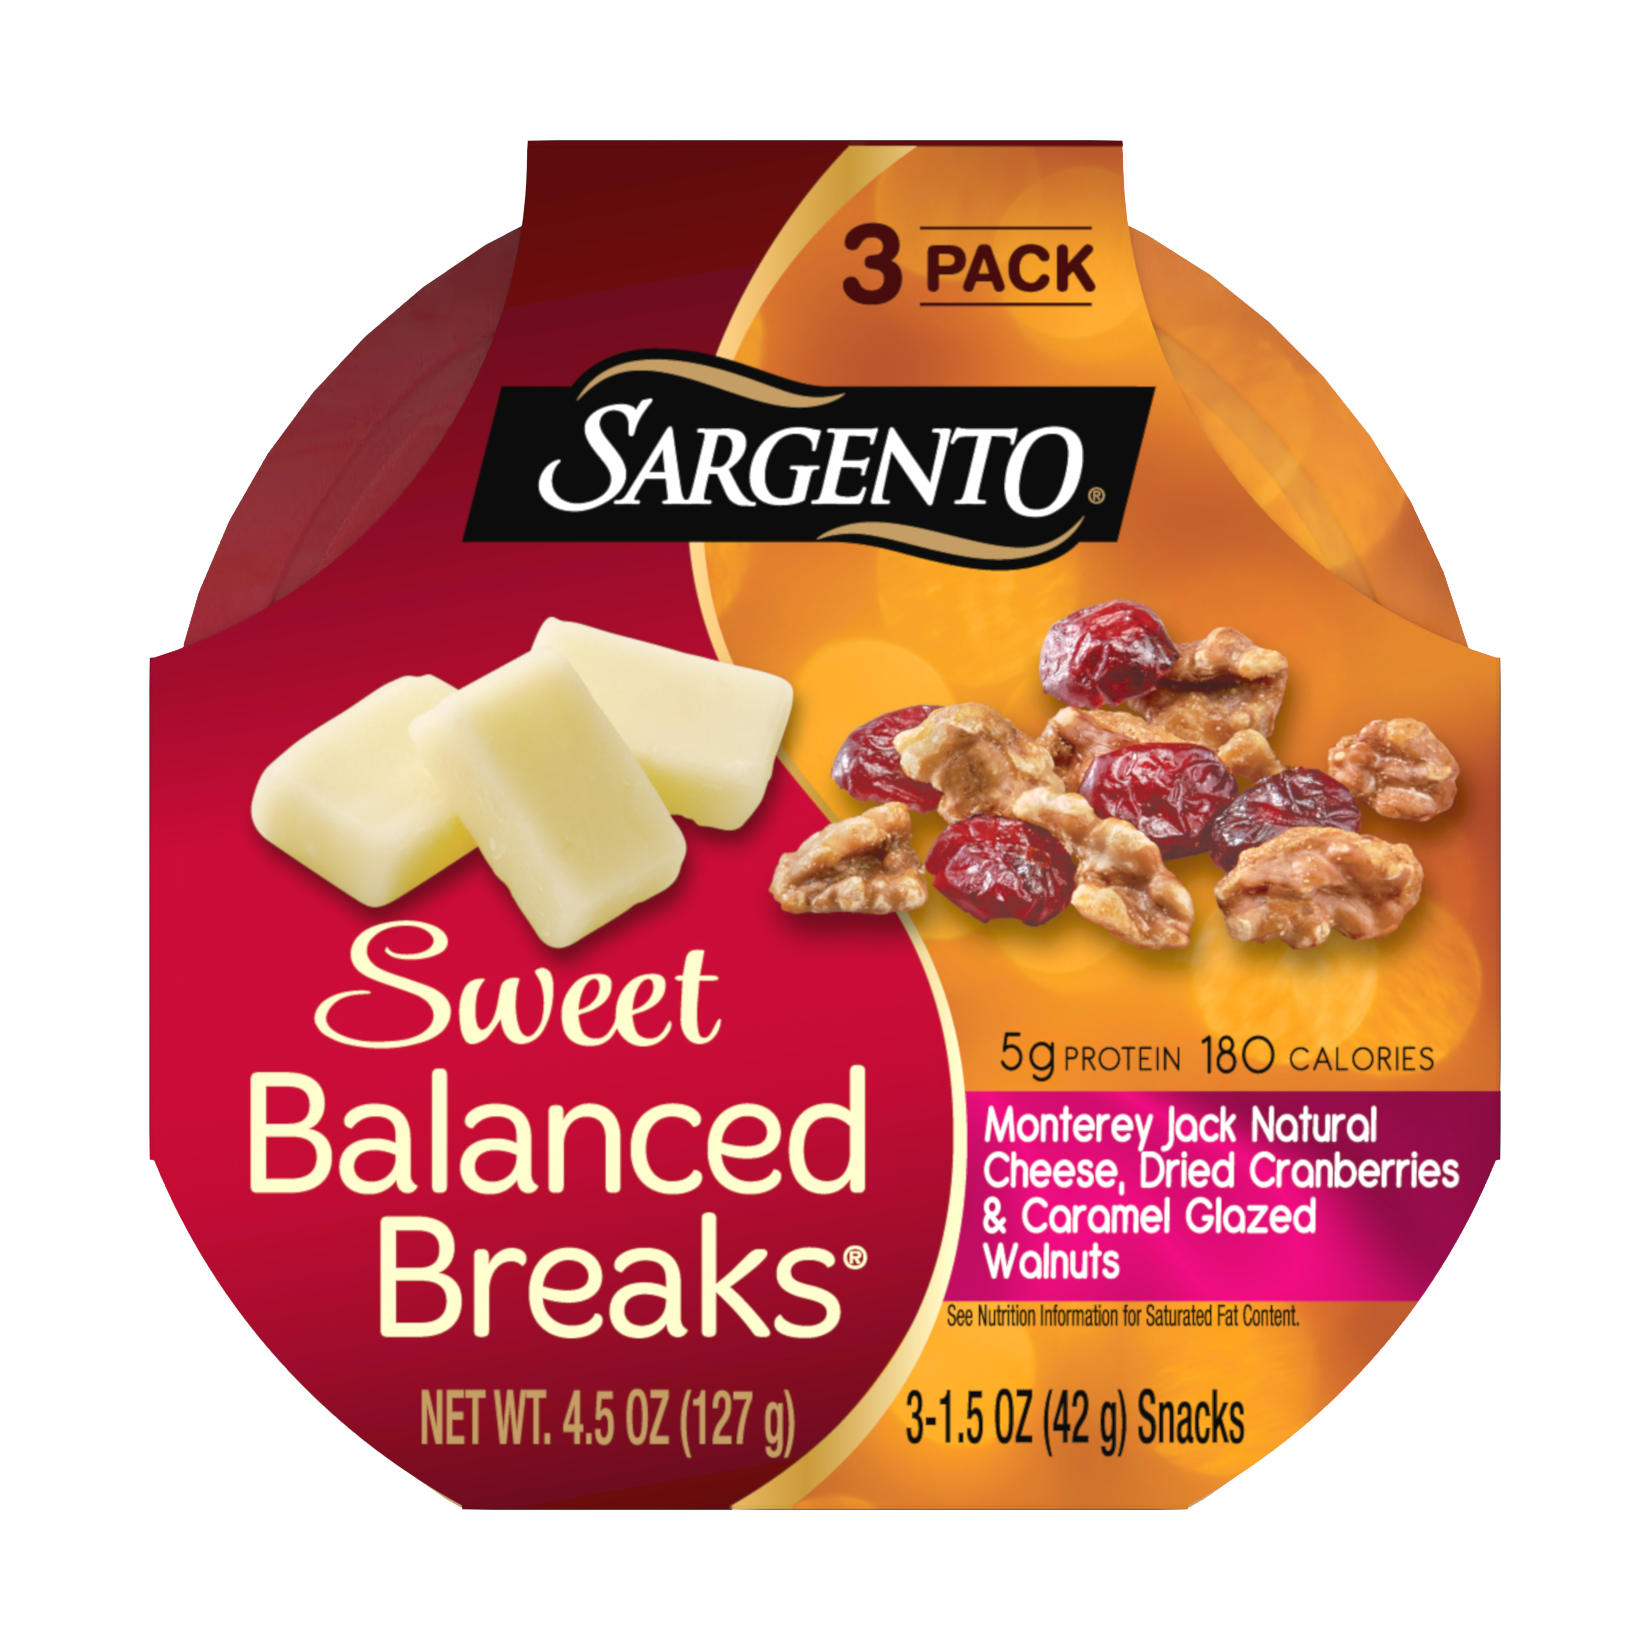 Sargento® Sweet Balanced Breaks® Monterey Jack Natural Cheese, Dried Cranberries and Caramel Glazed Walnuts